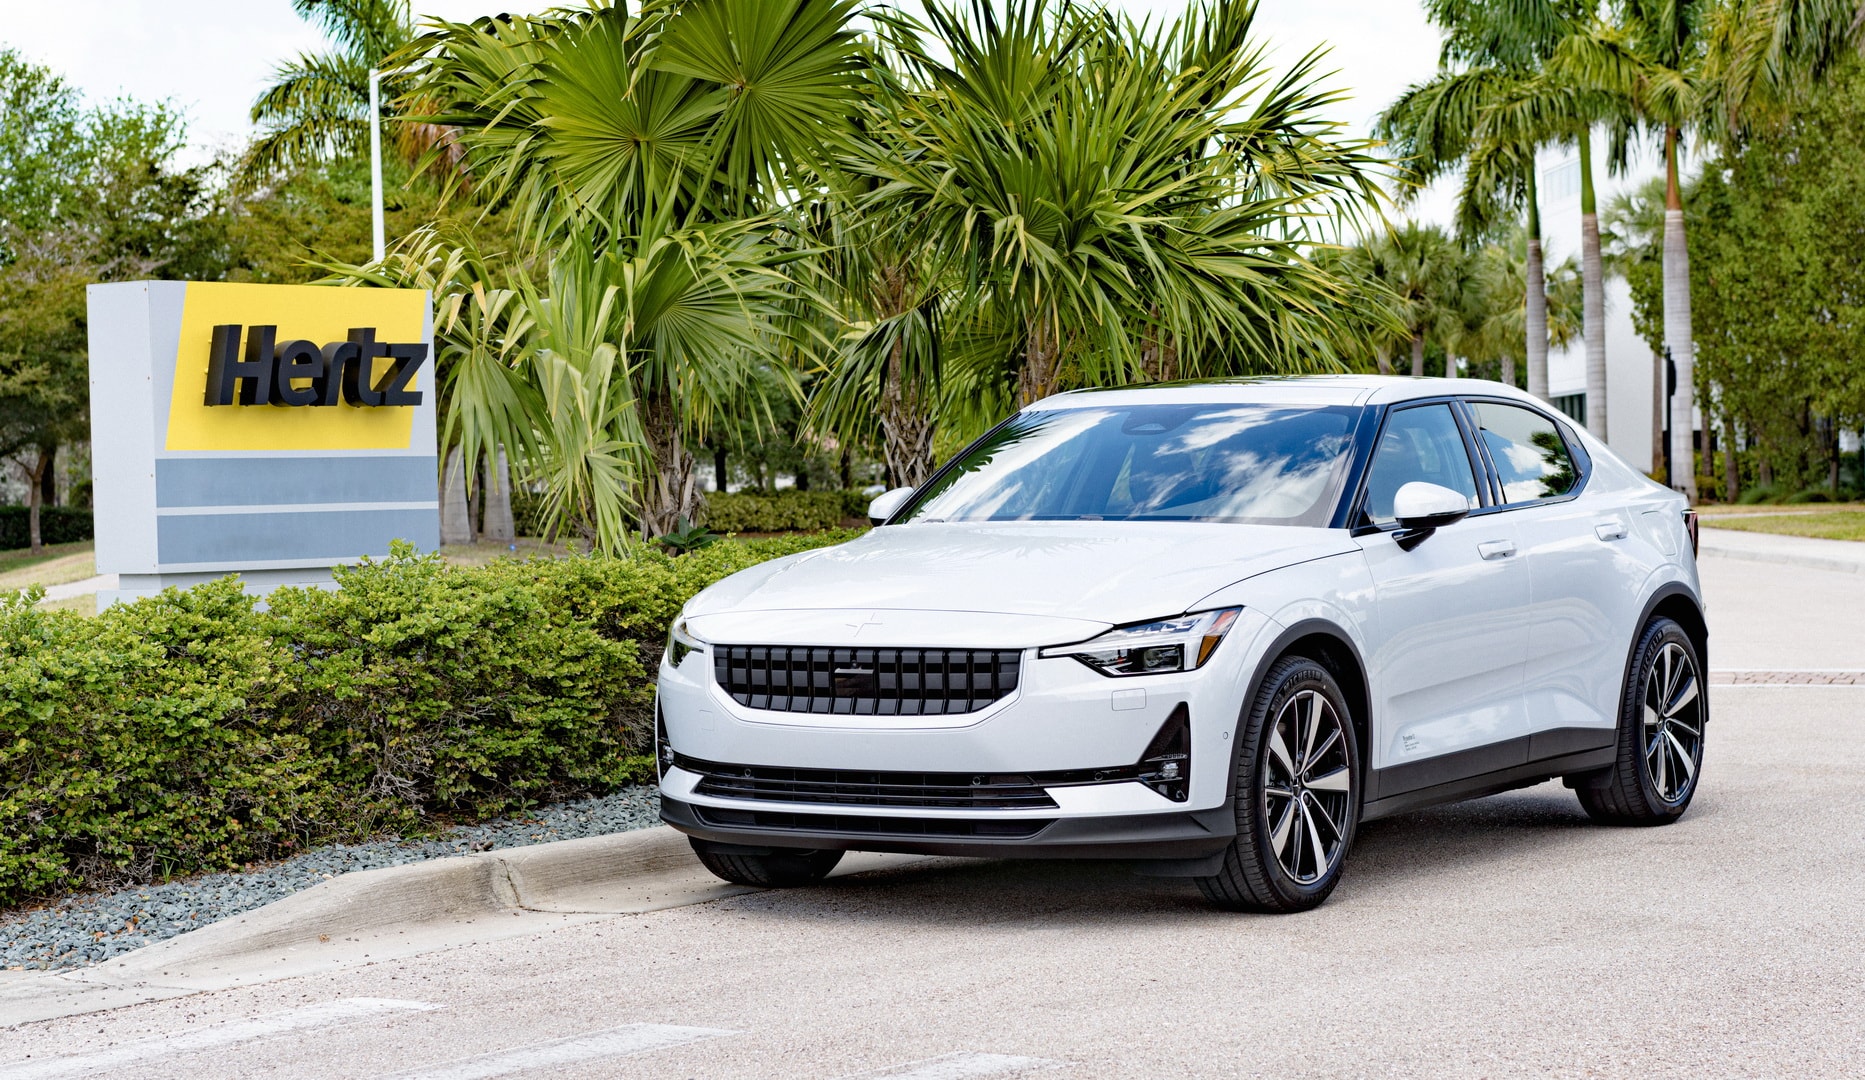 Hertz Teams up With Polestar to Purchase up to 65,000 Electric Vehicles